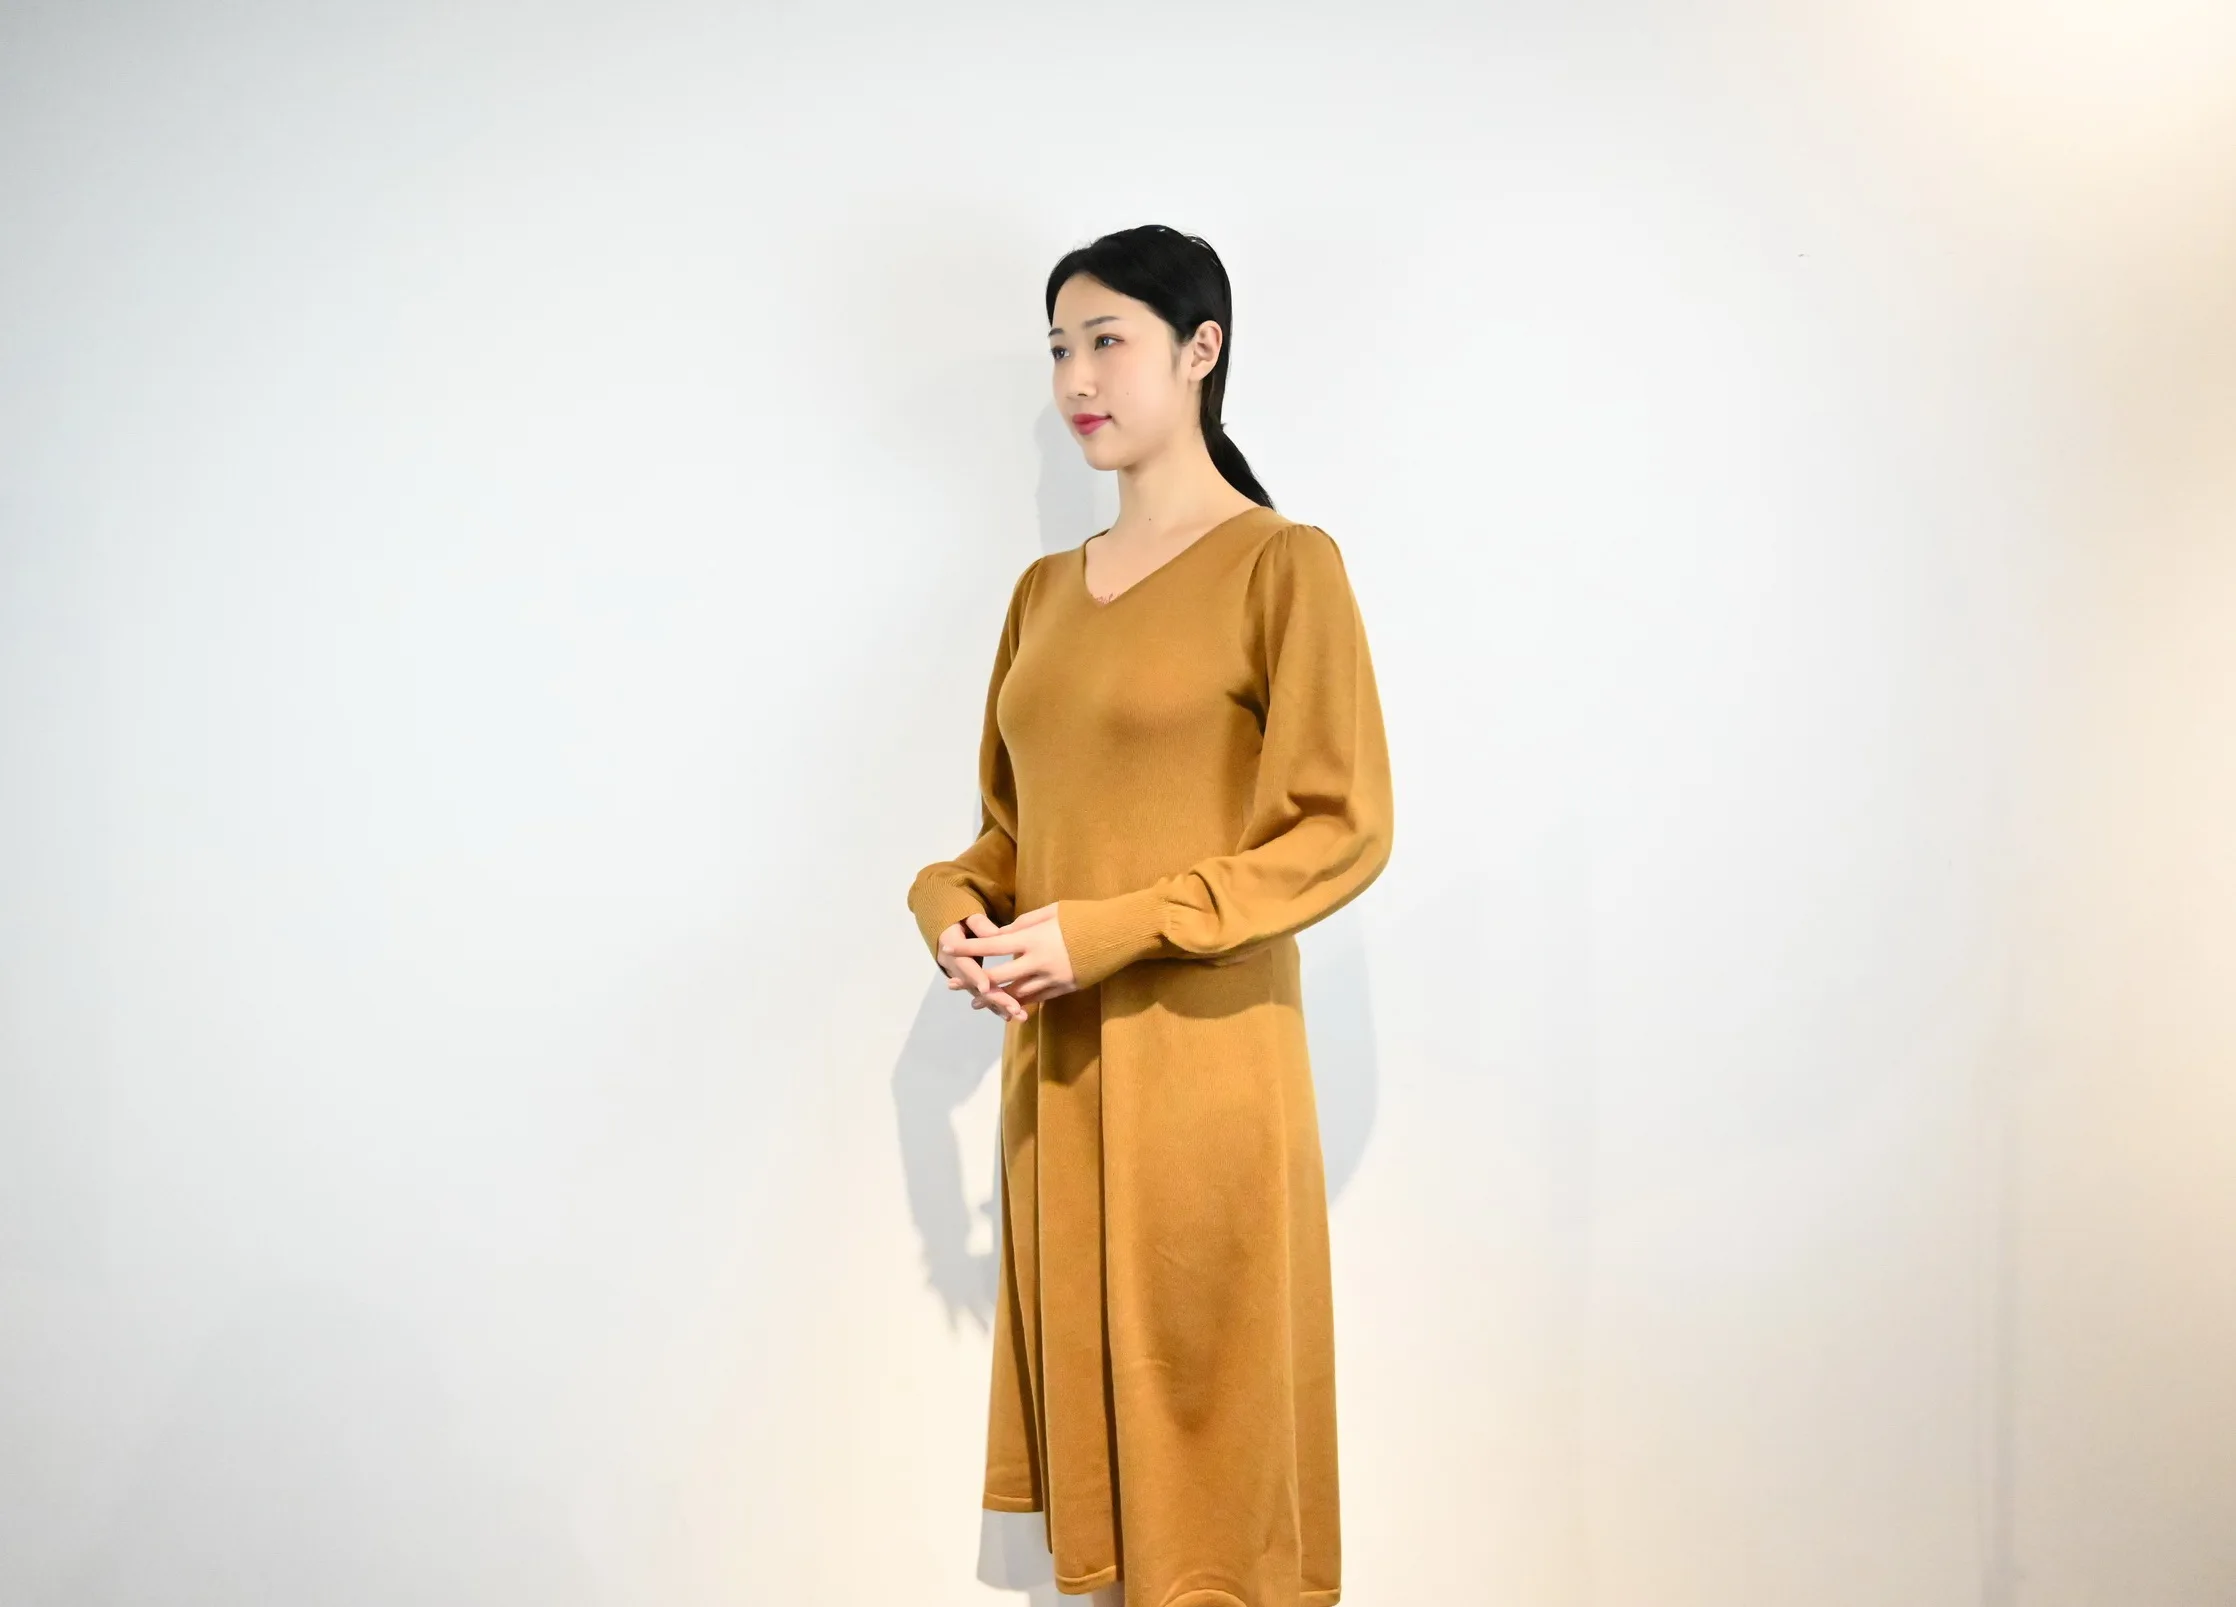 
New Arrivals Wool Women Slim Dress 2021 Ladies Fashion Clothing Long Sleeve Pullover Long Sweater Dress 